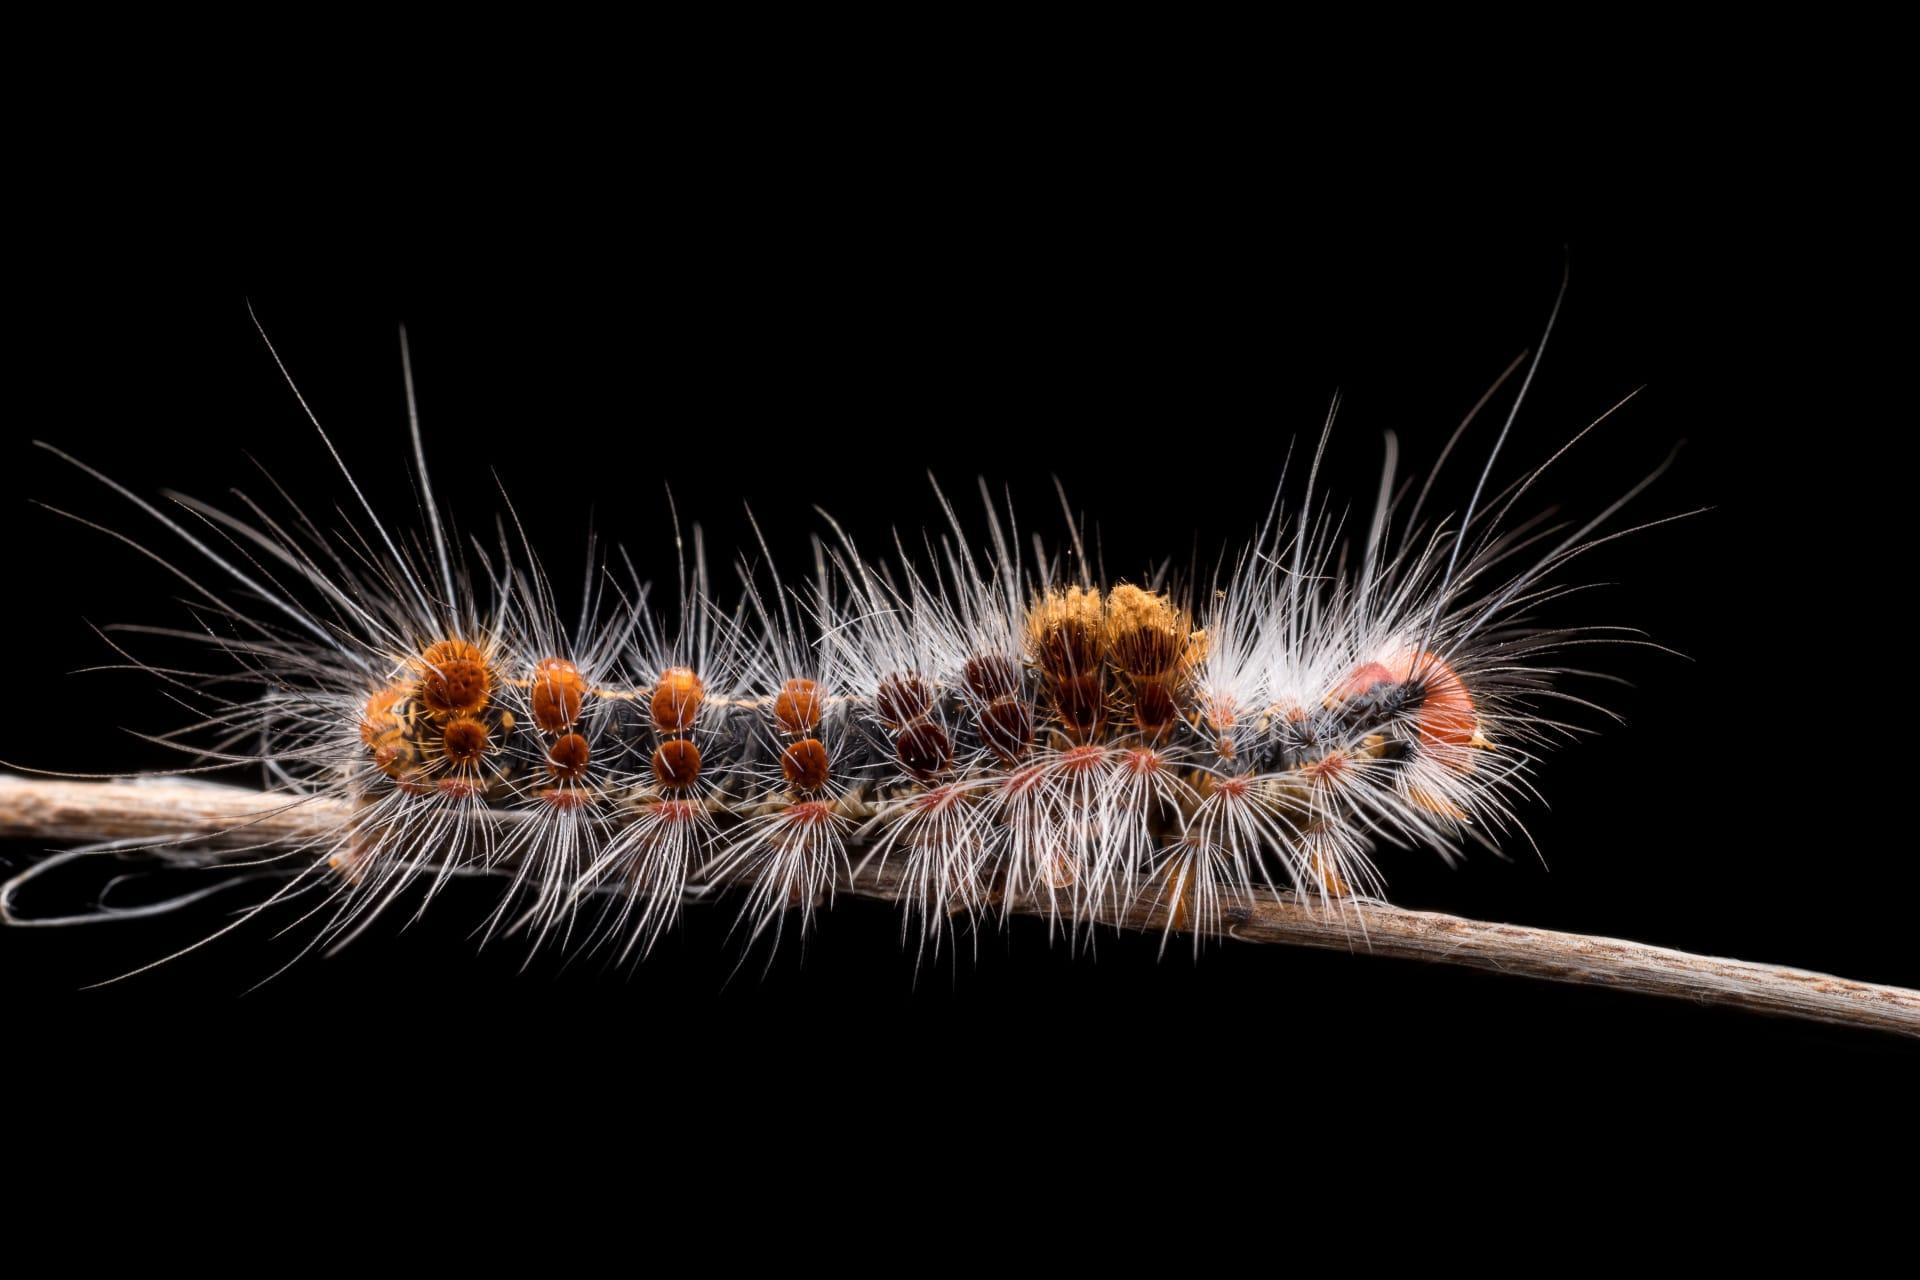 Caterpillar insect pictures